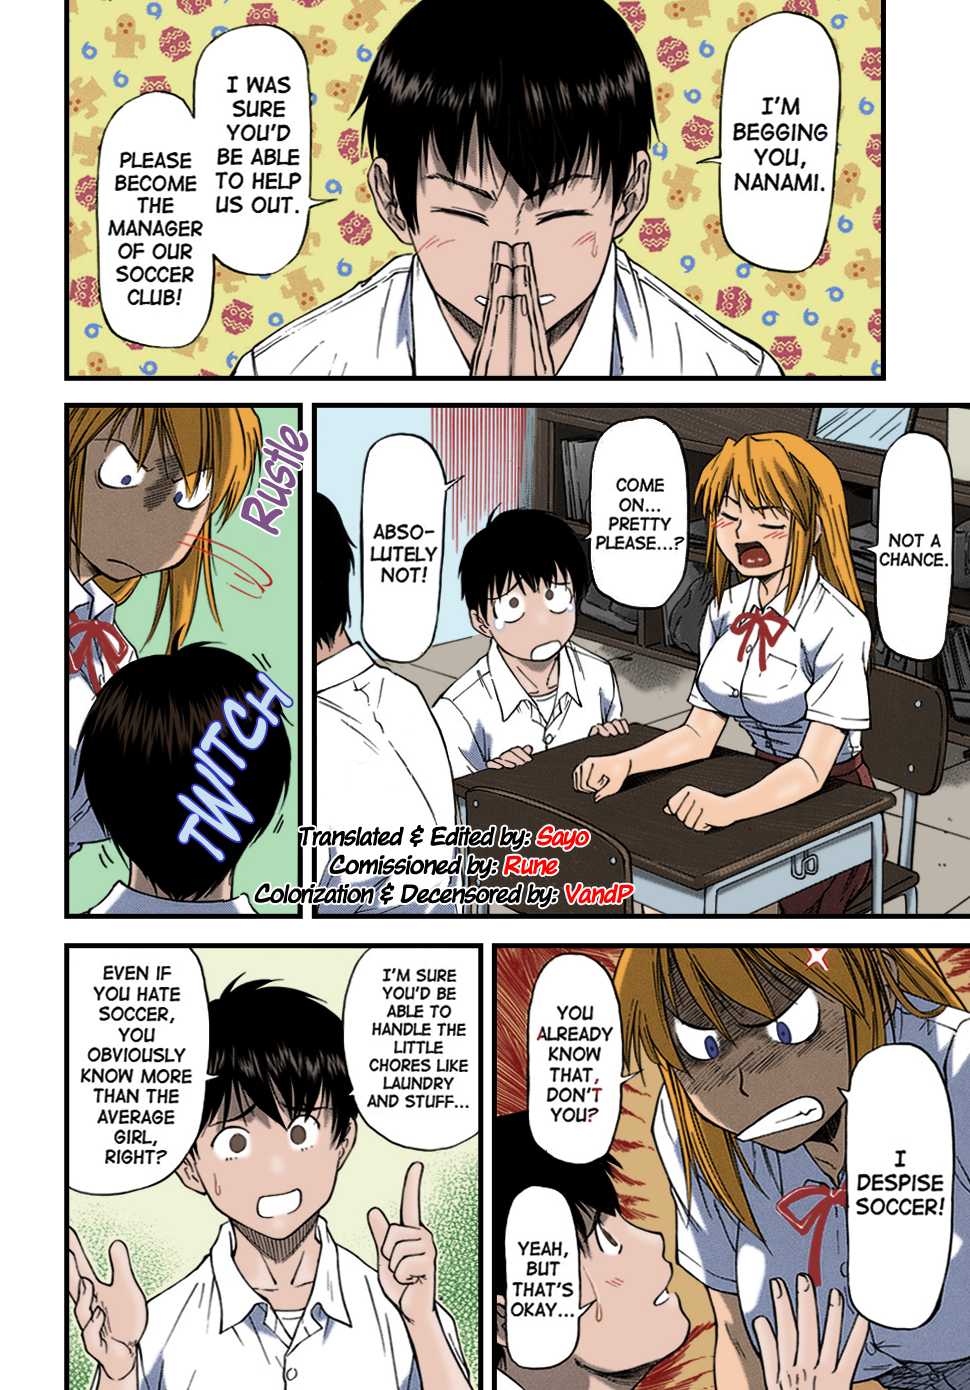 [Nagare Ippon] Offside Girl Ch. 1-4 [English] [Colorized] [Decensored] [WIP] - Page 8